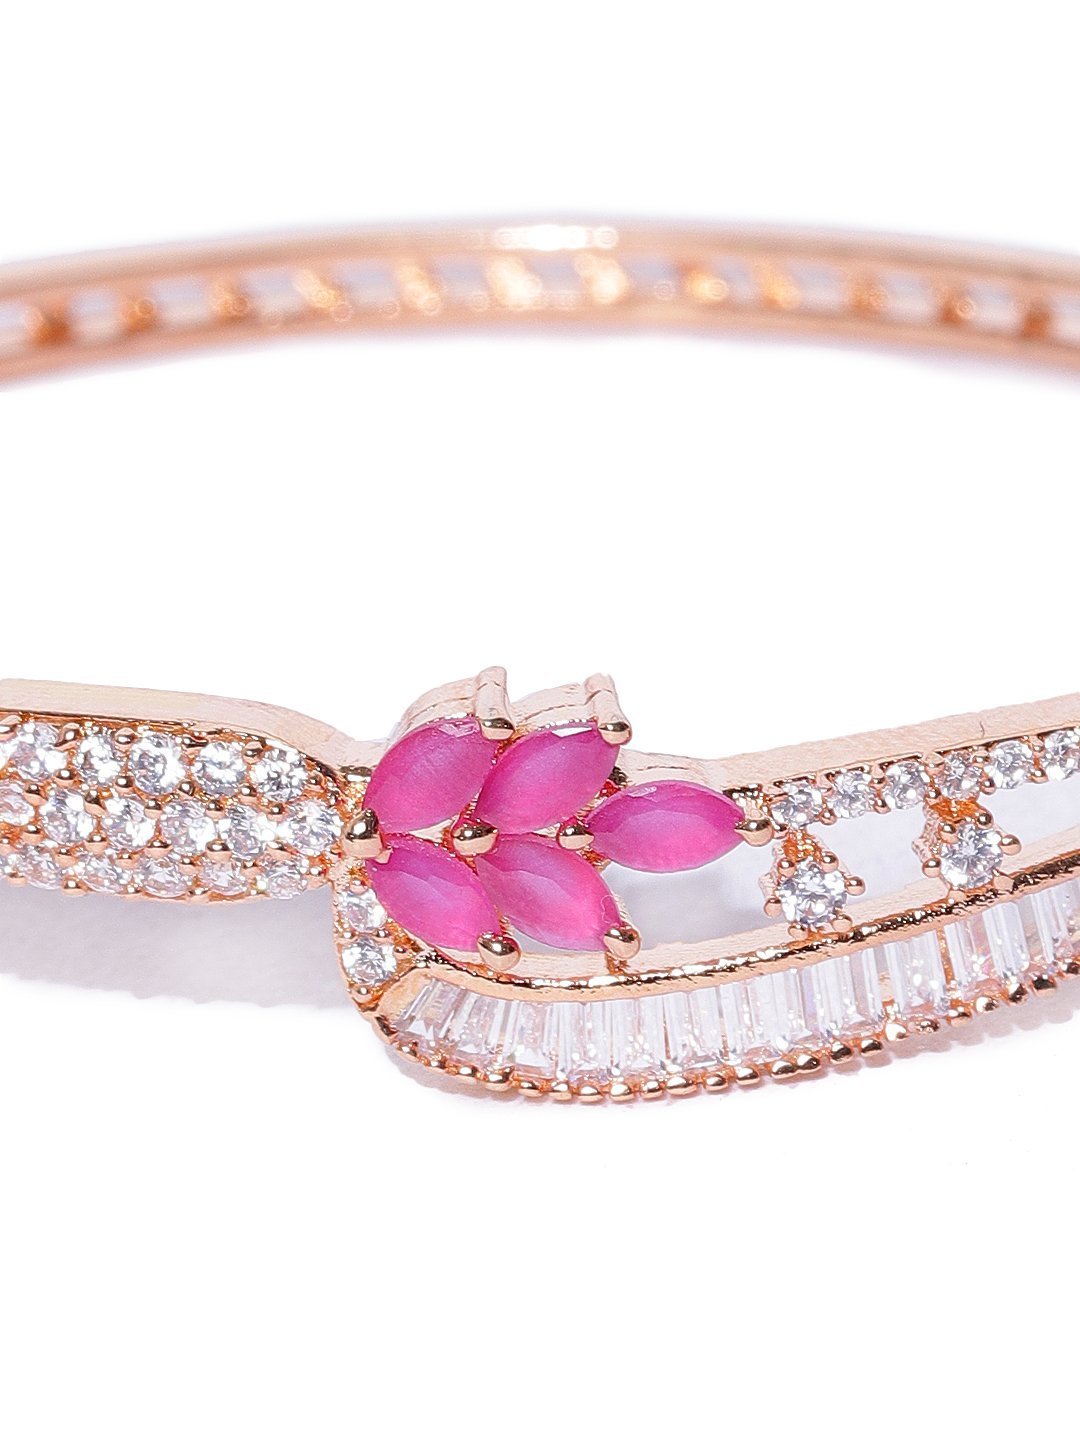 Women's Rose Gold-Plated Ruby and American Diamond Studded Bracelet in Floral Pattern - Priyaasi